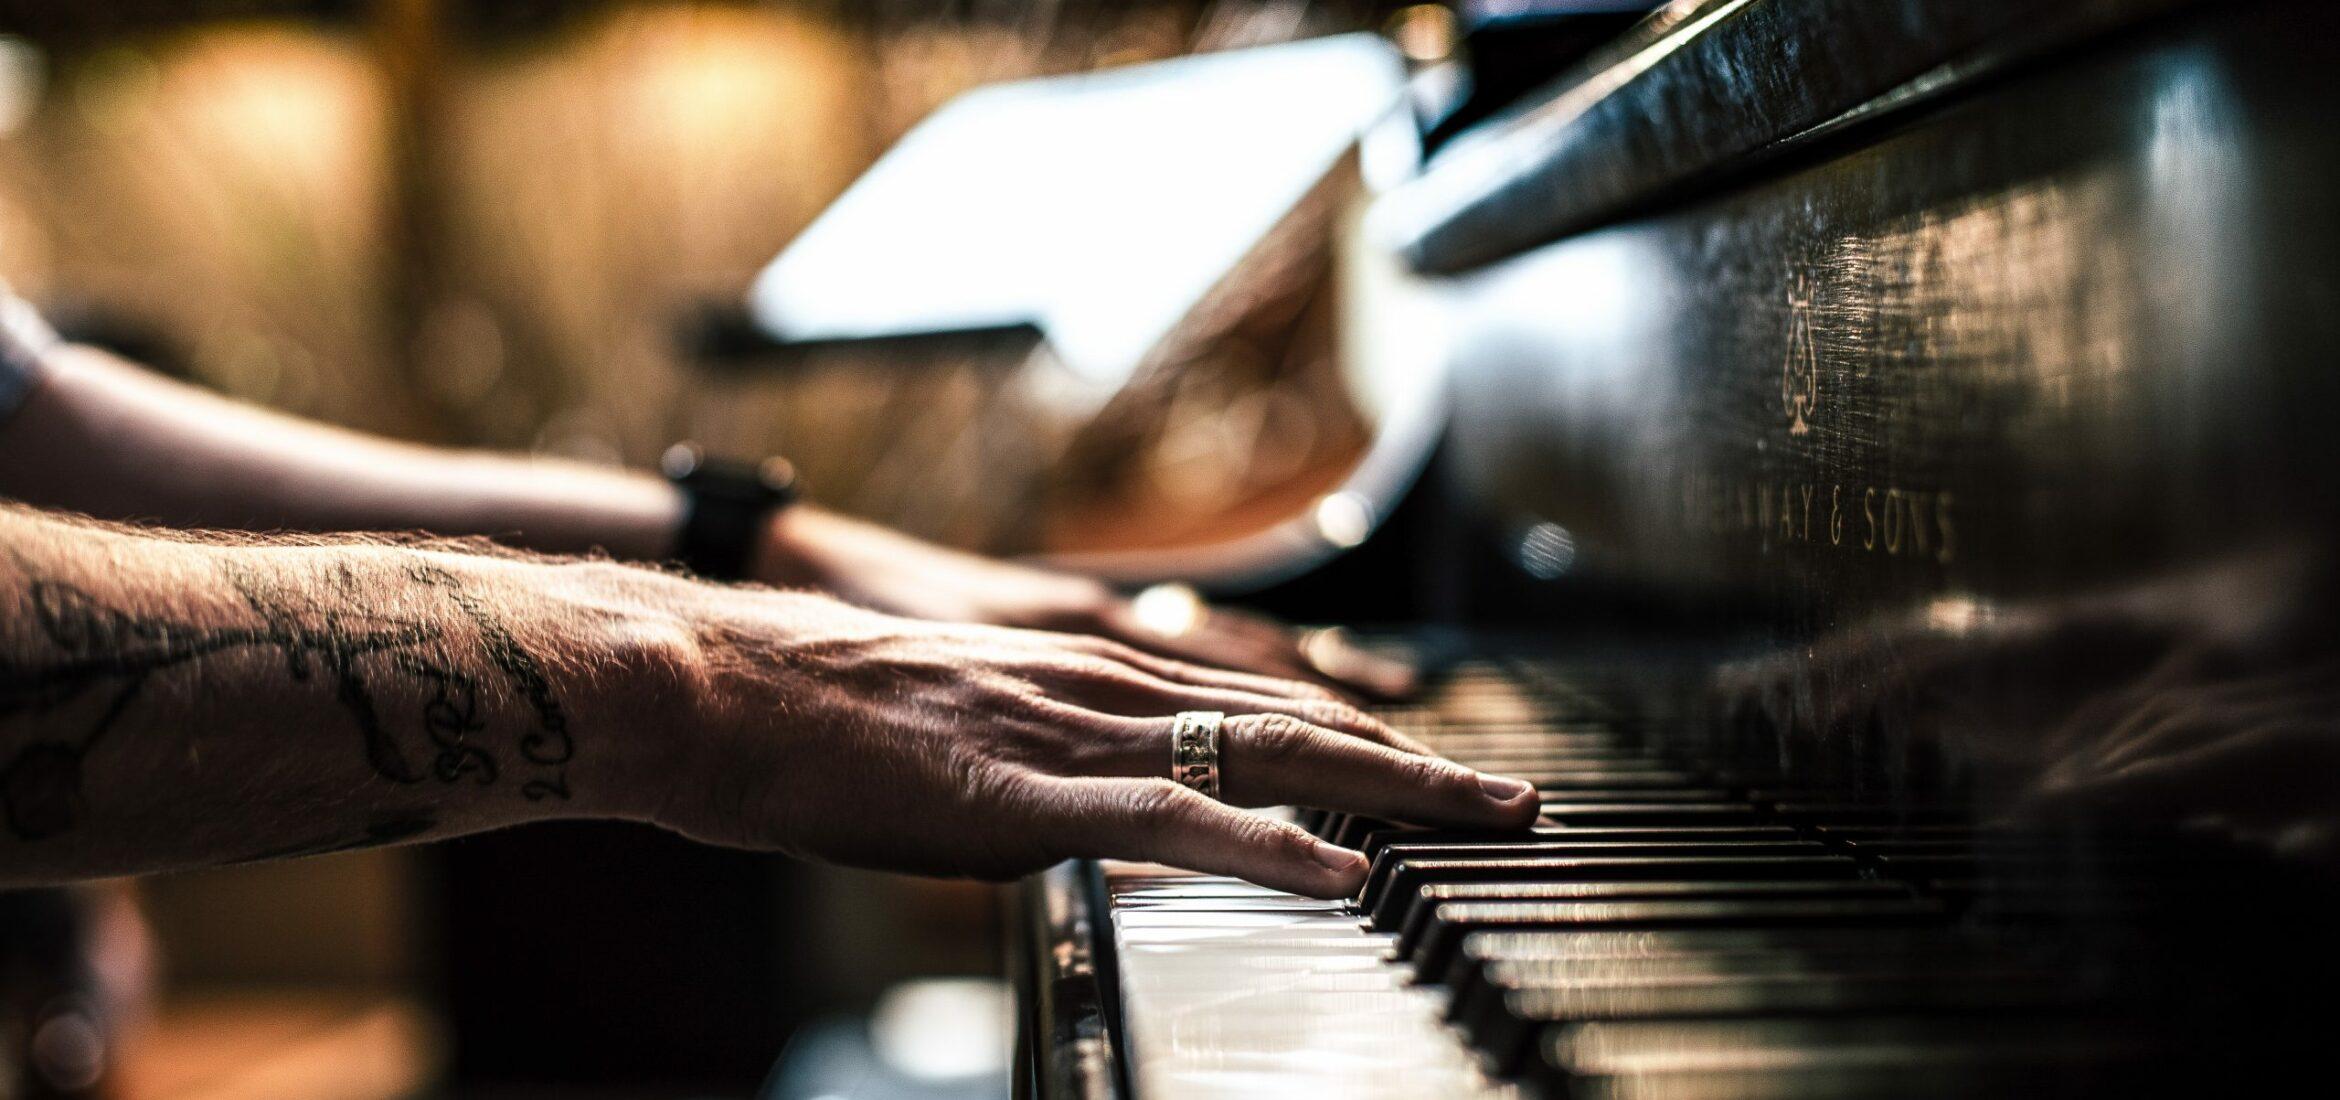 Learn Piano Online: 4 Great Resources to Learn Keyboard